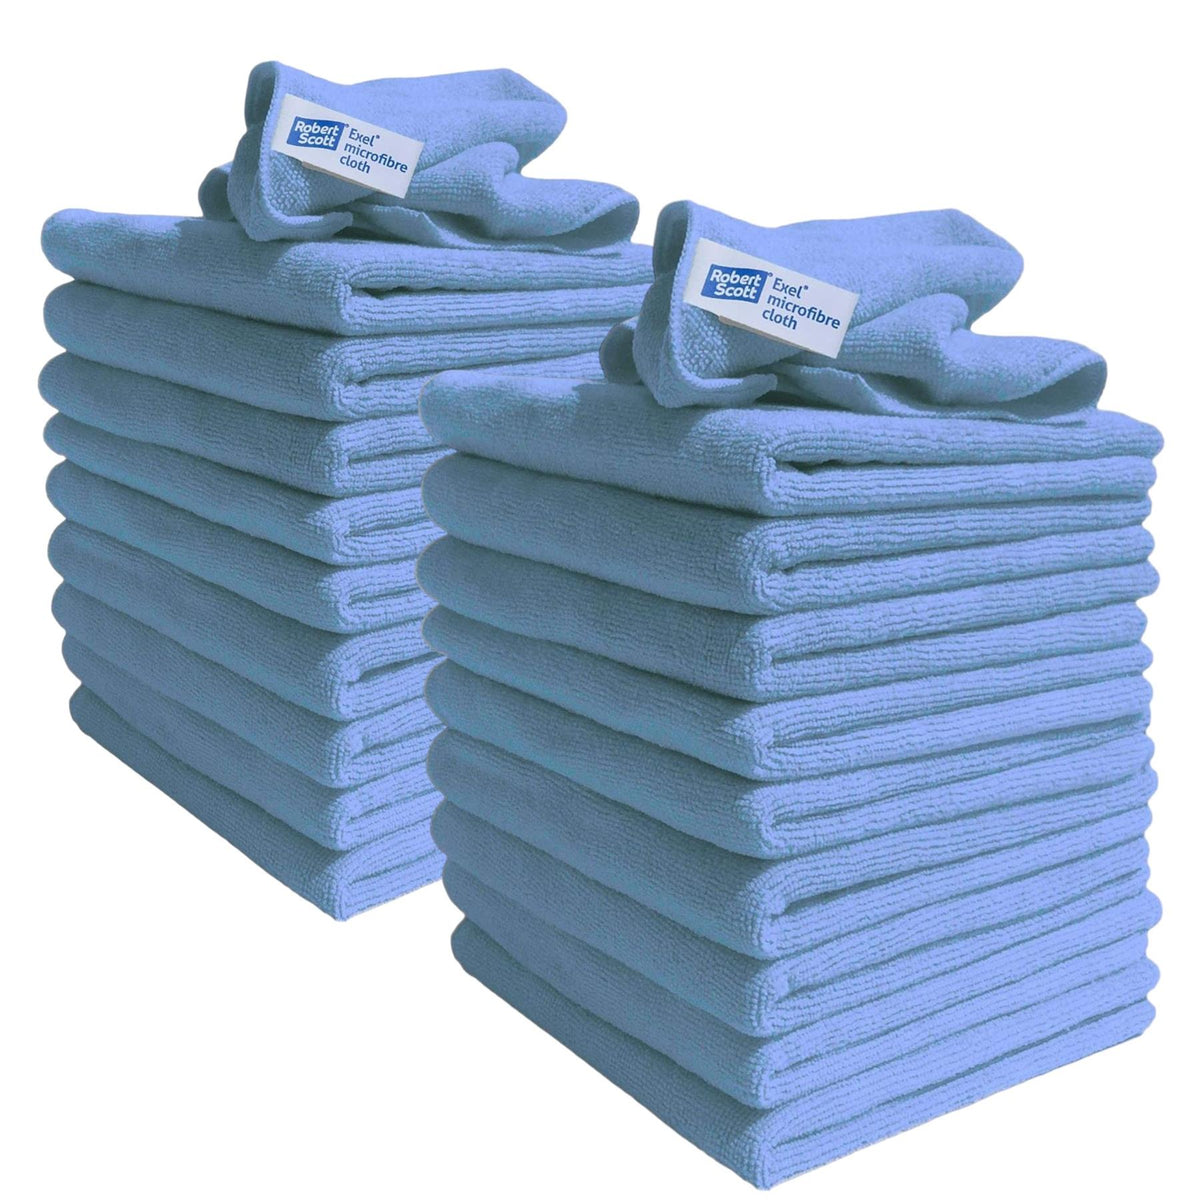 20 Blue Exel Microfibre cloths, Lint Free, For Polishing, Washing, Waxing And Dusting